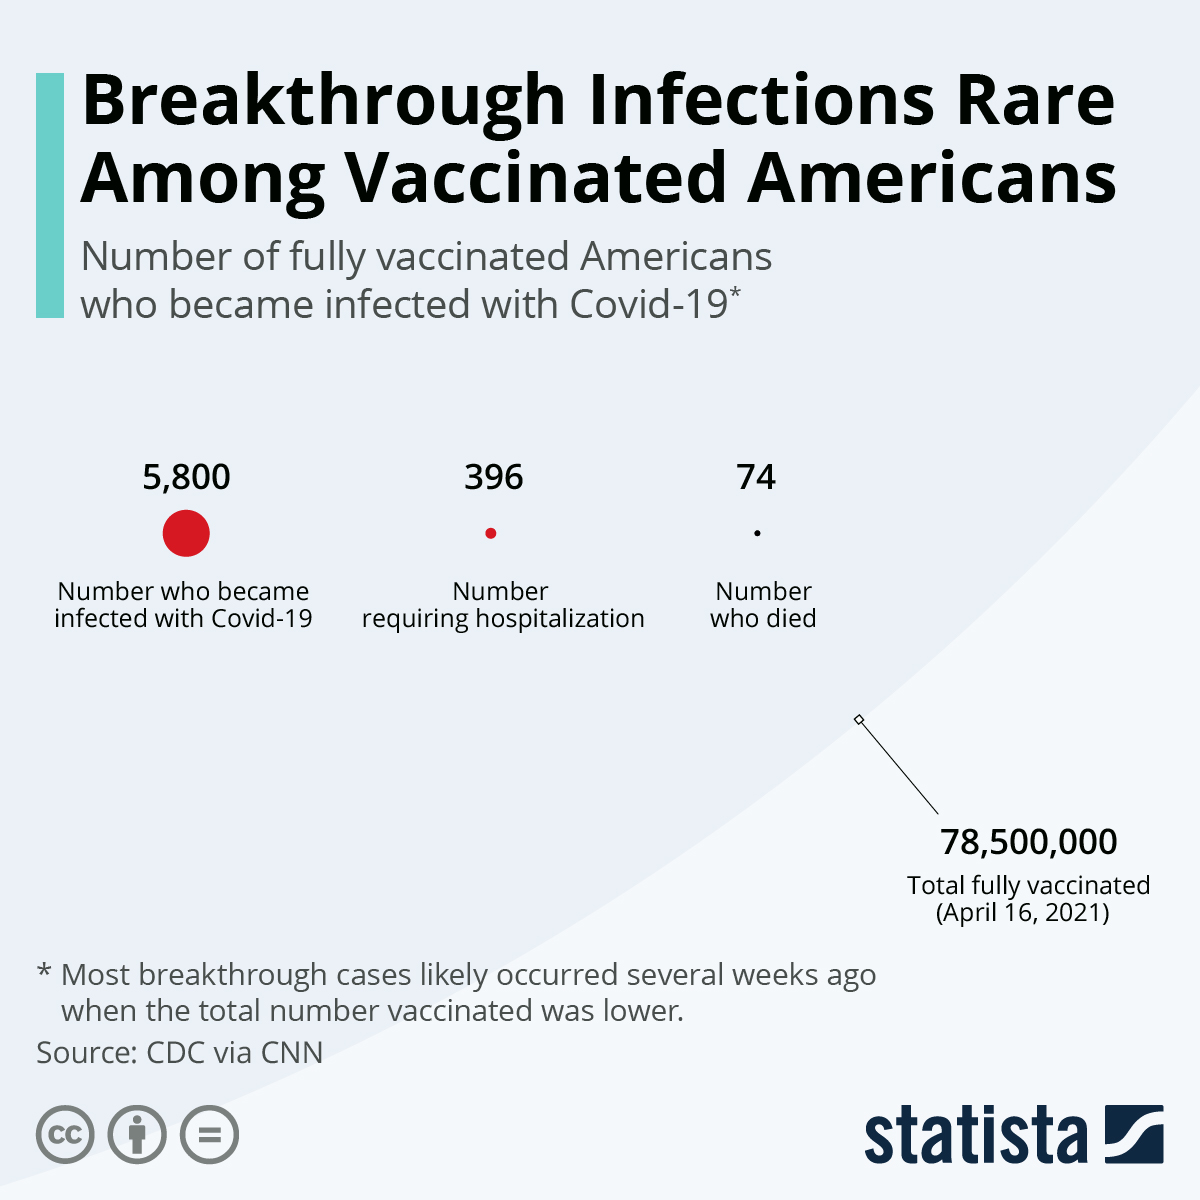 Breakthrough Infections Rare Among Vaccinated Americans